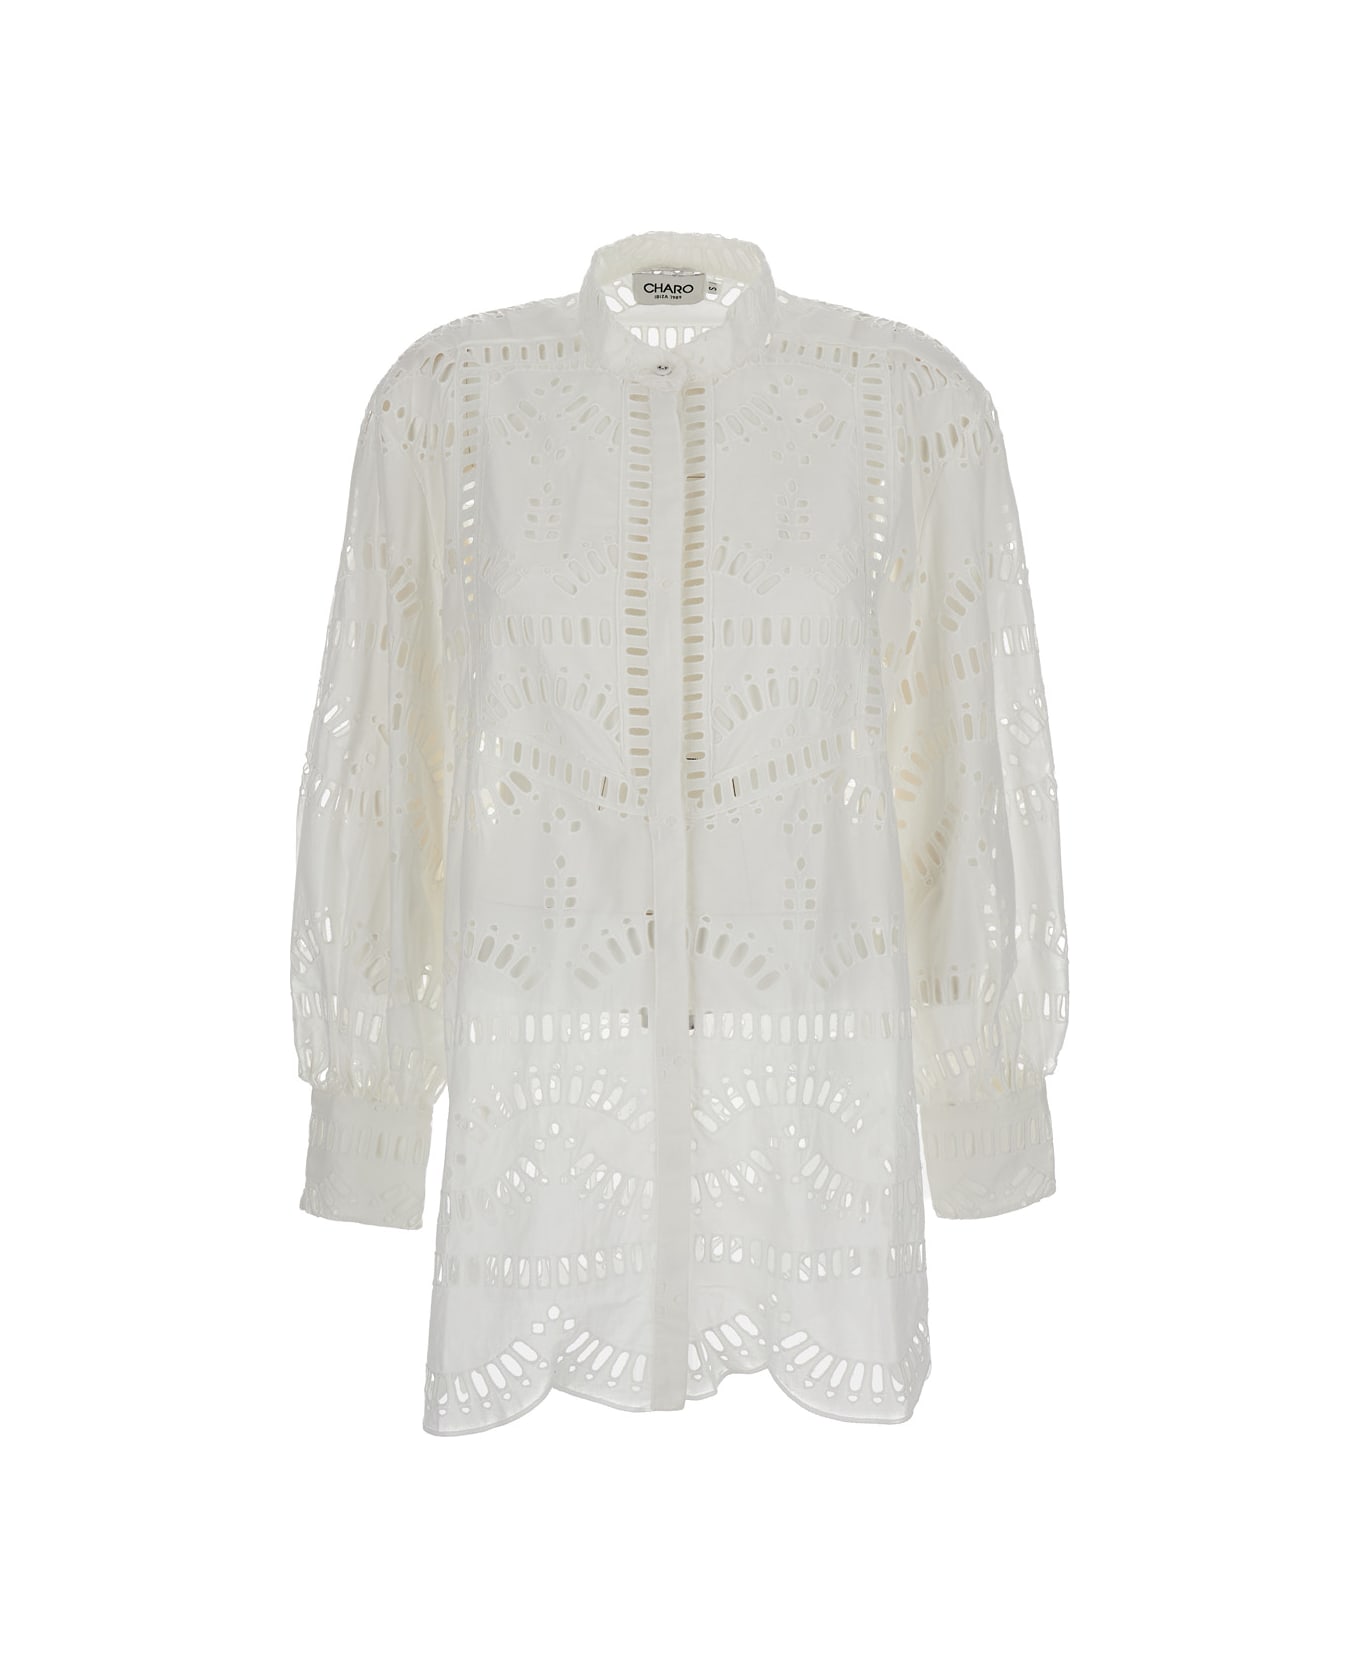 Charo Ruiz White 'jeky' Blouse With Cut-out Detail In Cotton Woman - White ブラウス